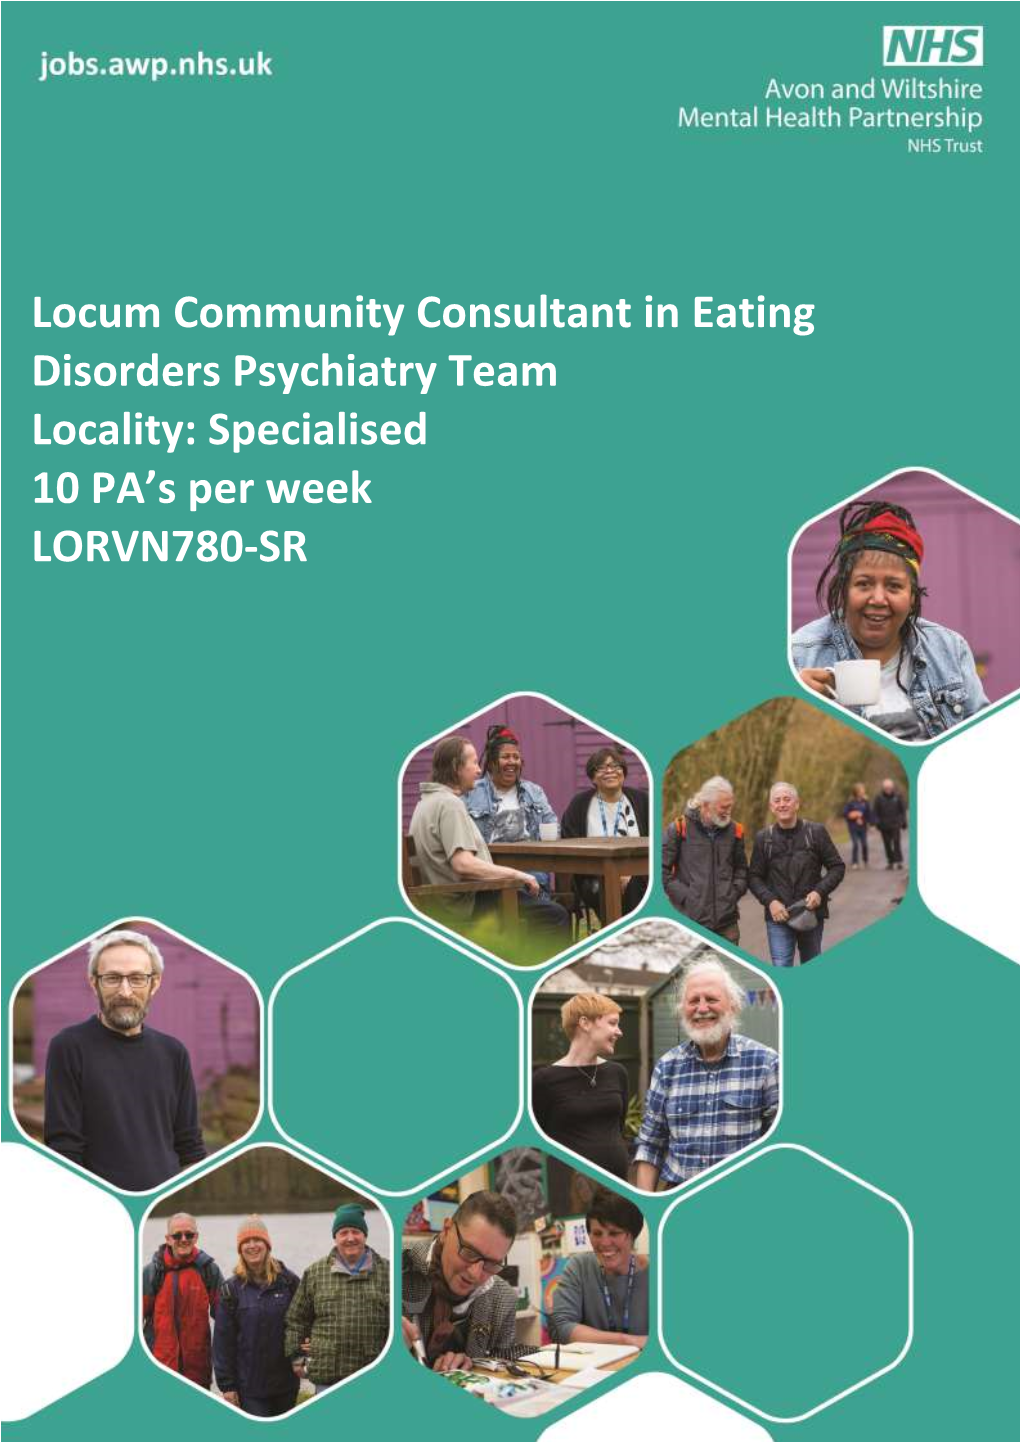 Locum Community Consultant in Eating Disorders Psychiatry Team Locality: Specialised 10 PA’S Per Week LORVN780-SR